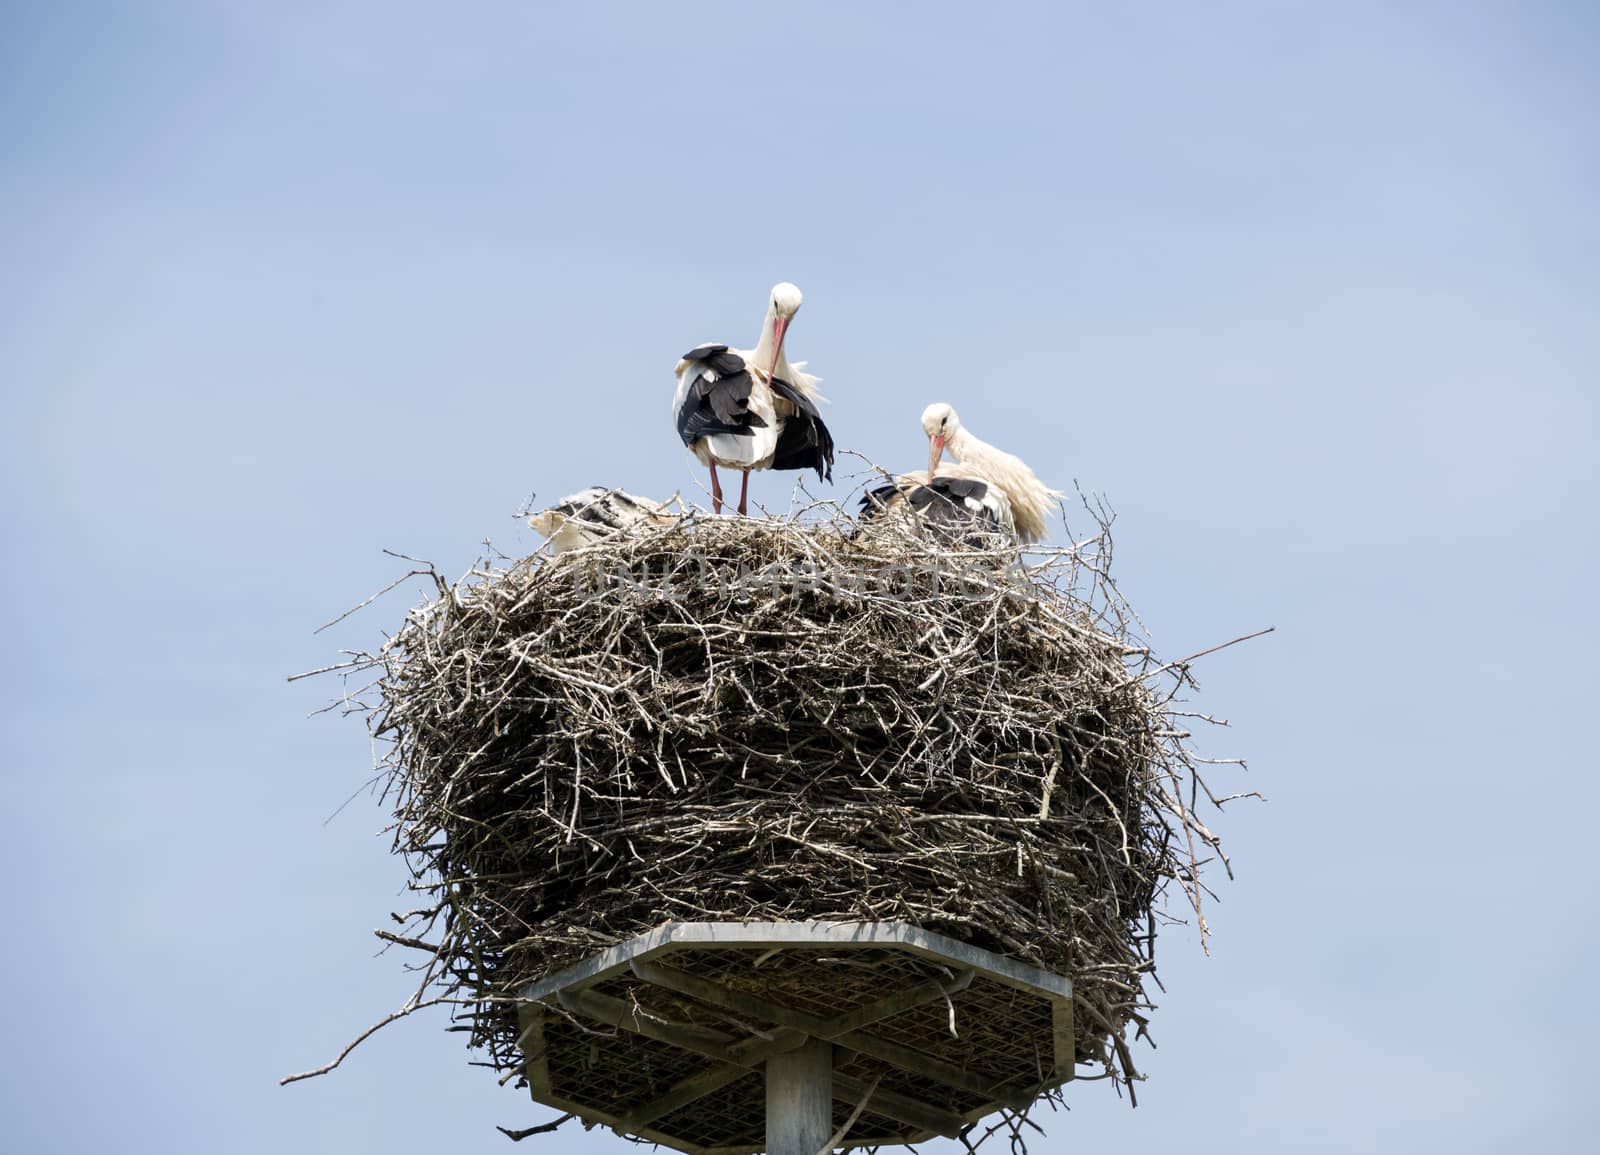 nest with stork in holland with blue sky as background